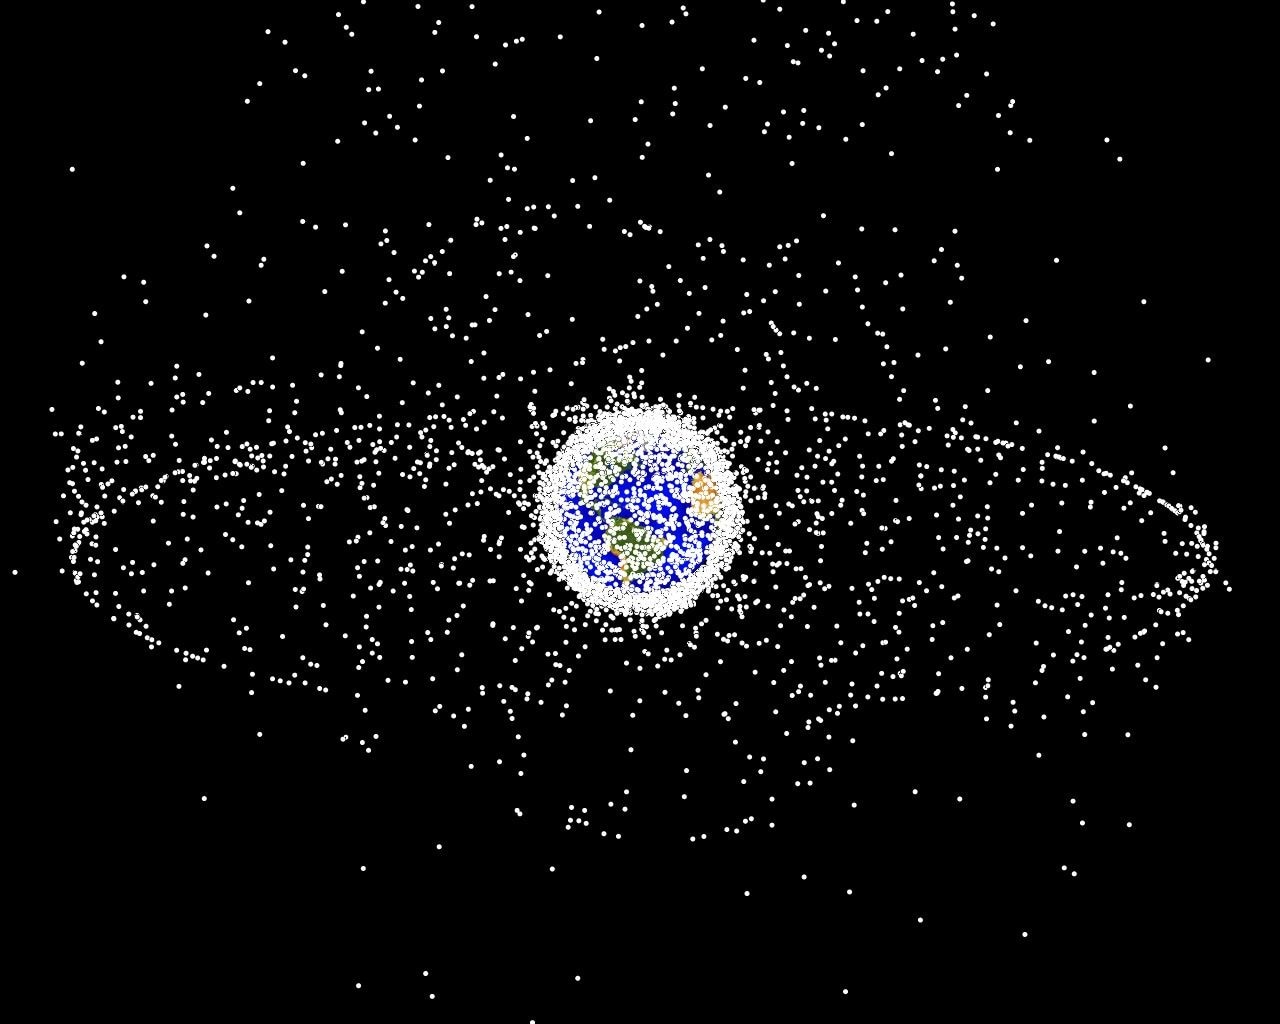 This image of objects and debris in geosynchronous orbit is generated from a distant oblique vantage point to provide a good view of the object population in the geosynchronous region, about 22,000 miles from Earth. The larger population of objects over the Northern Hemisphere is due mostly to Russian objects in high-inclination, high-eccentricity orbits. NASA image